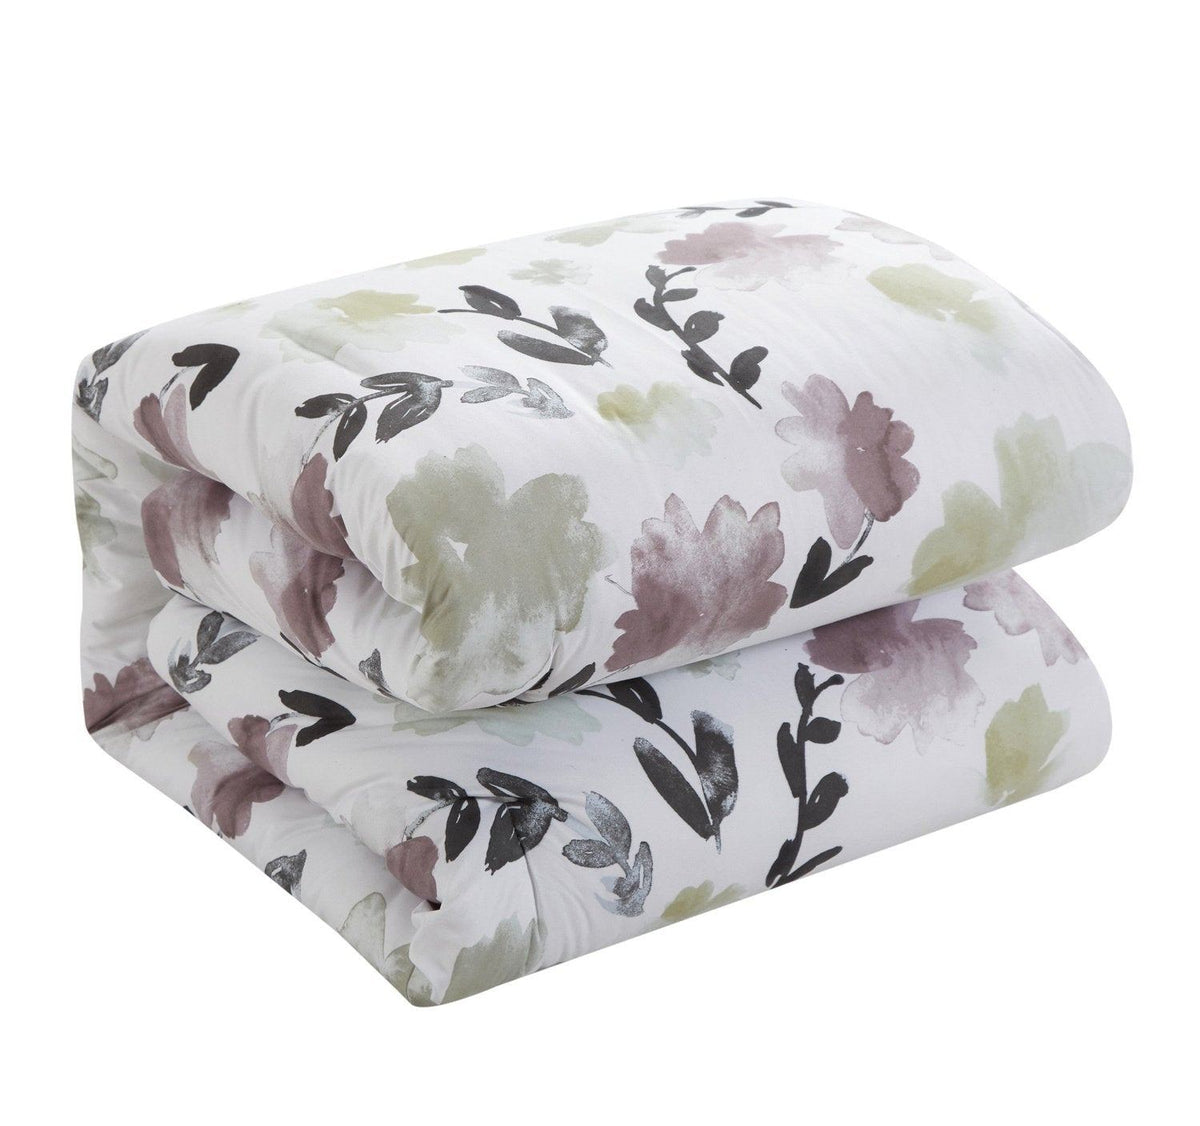 Chic Home Everly Green 7 Piece Reversible Watercolor Floral Print Duvet Cover Set 